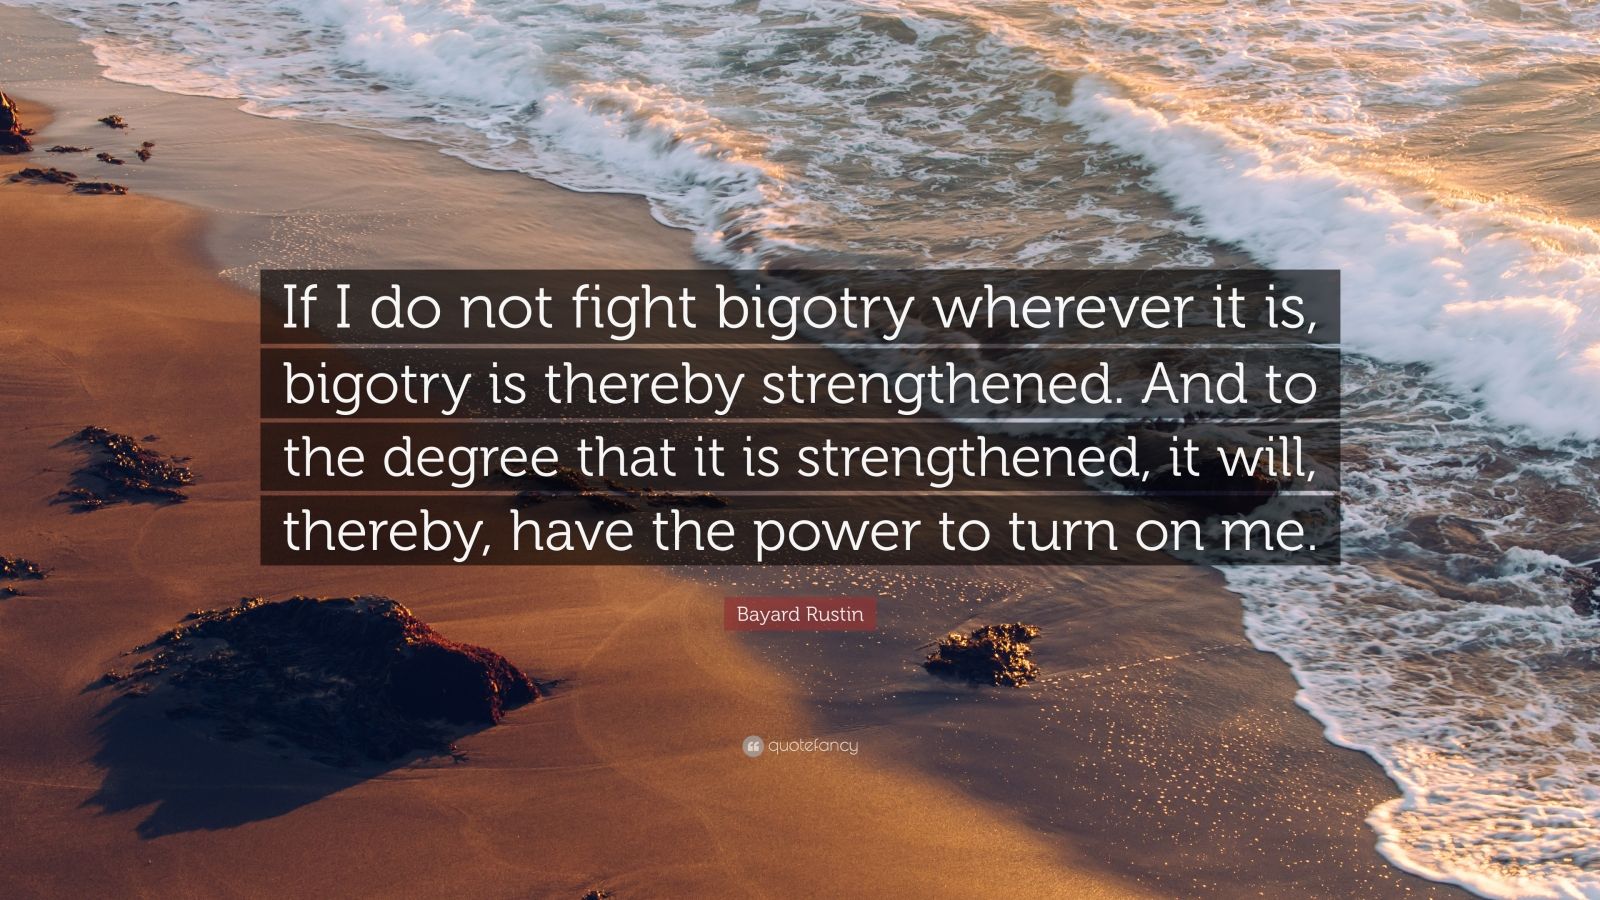 Bayard Rustin Quote: "If I do not fight bigotry wherever it is, bigotry is thereby strengthened ...